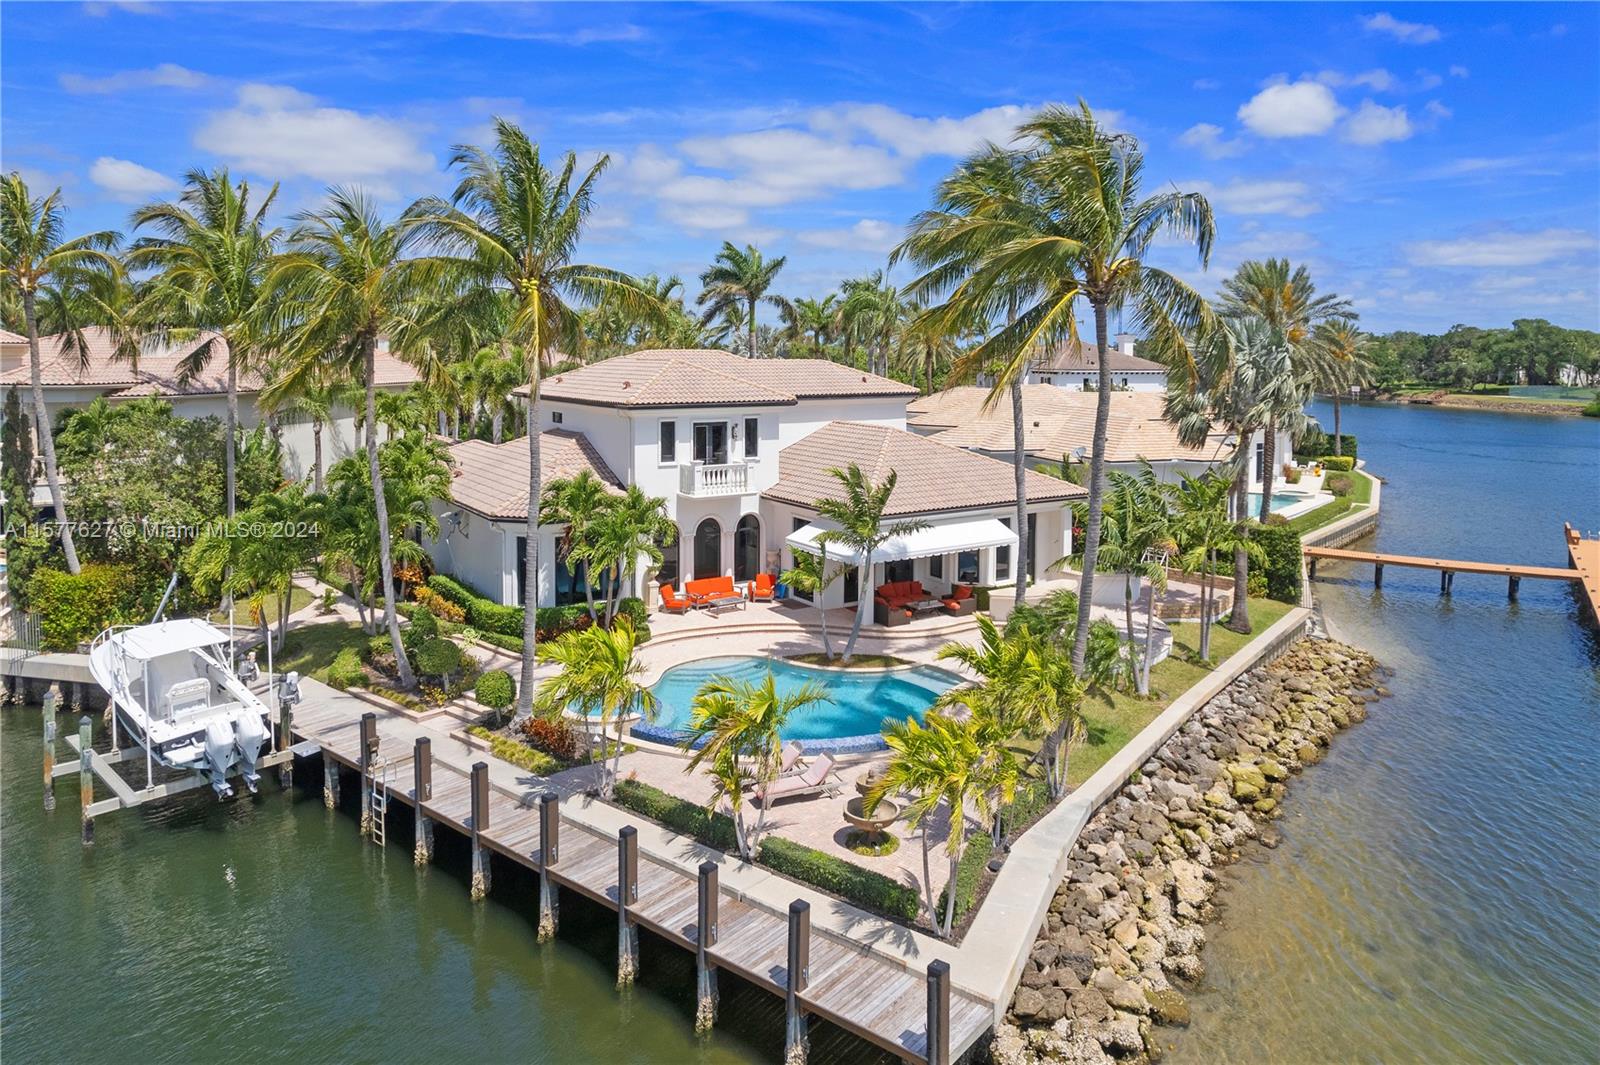 Beautiful waterfront property on a point lot with 260' of frontage and deep water dockage for up to an 80' vessel (special exception for 100' TBD) nestled in the prestigious gated waterfront community Harbour Isles. Panoramic views of the Intercoastal Waterway and North Palm Beach Country Club golf course. This 5 bedroom home includes a ground floor master suite, 1st floor, office, large open kitchen with a gas cooktop, wine cooler, center island and breakfast bar surrounded by a summer kitchen. Spacious outdoor patio includes bar, and BBQ. Dock includes boat and jet ski lift.. Great for the seasonal boat parade! Only minutes to Palm Beach Airport, gourmet markets, restaurants and all the amenities that make this part of Florida the place for a high quality, yet casual lifestyle.